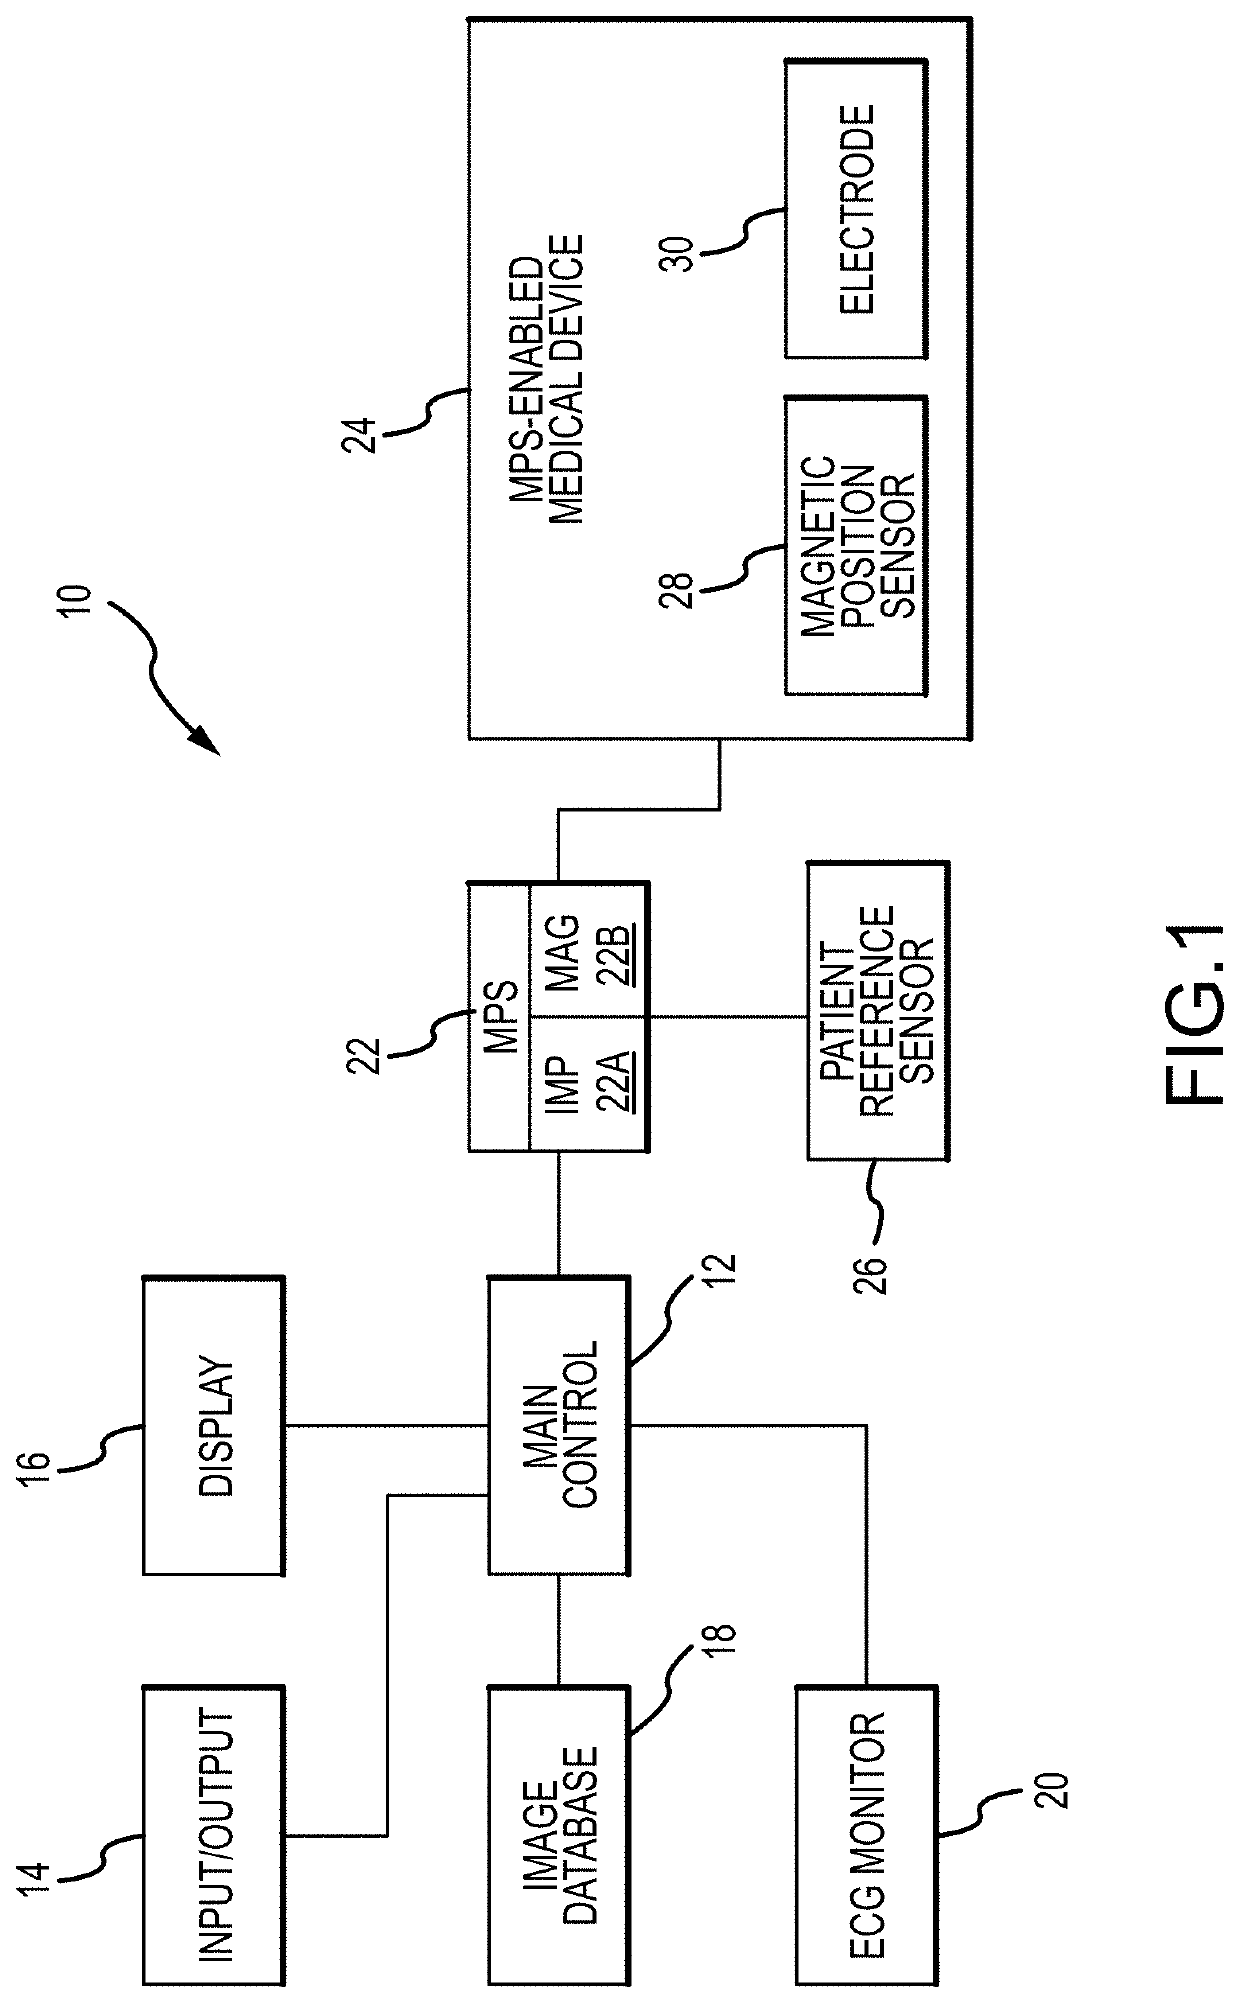 Method for medical device localization based on magnetic and impedance sensors